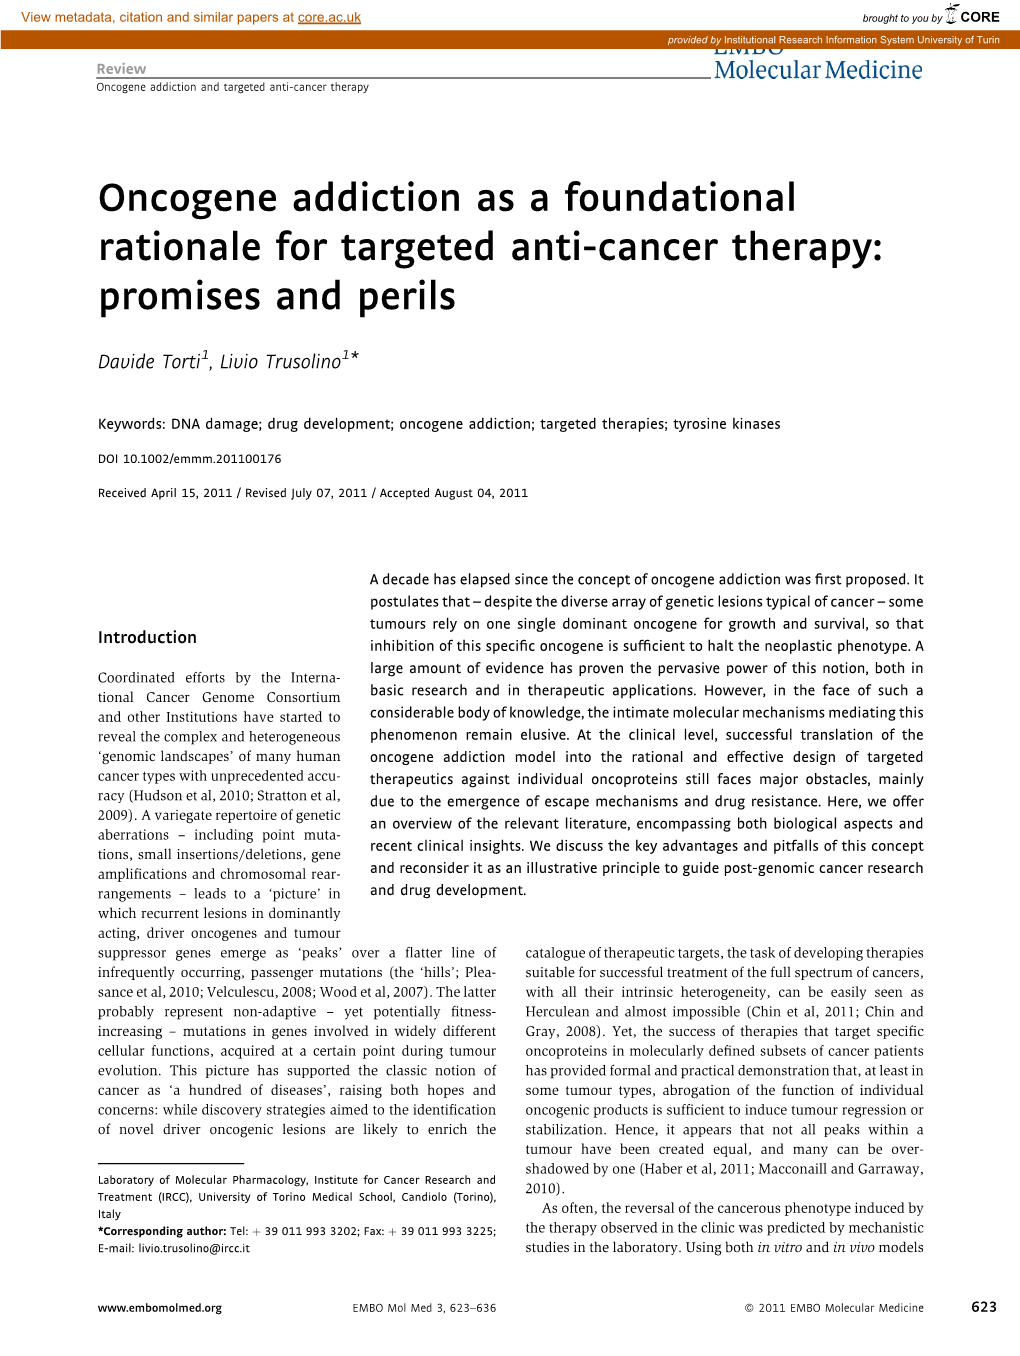 Oncogene Addiction As a Foundational Rationale for Targeted Anti-Cancer Therapy: Promises and Perils